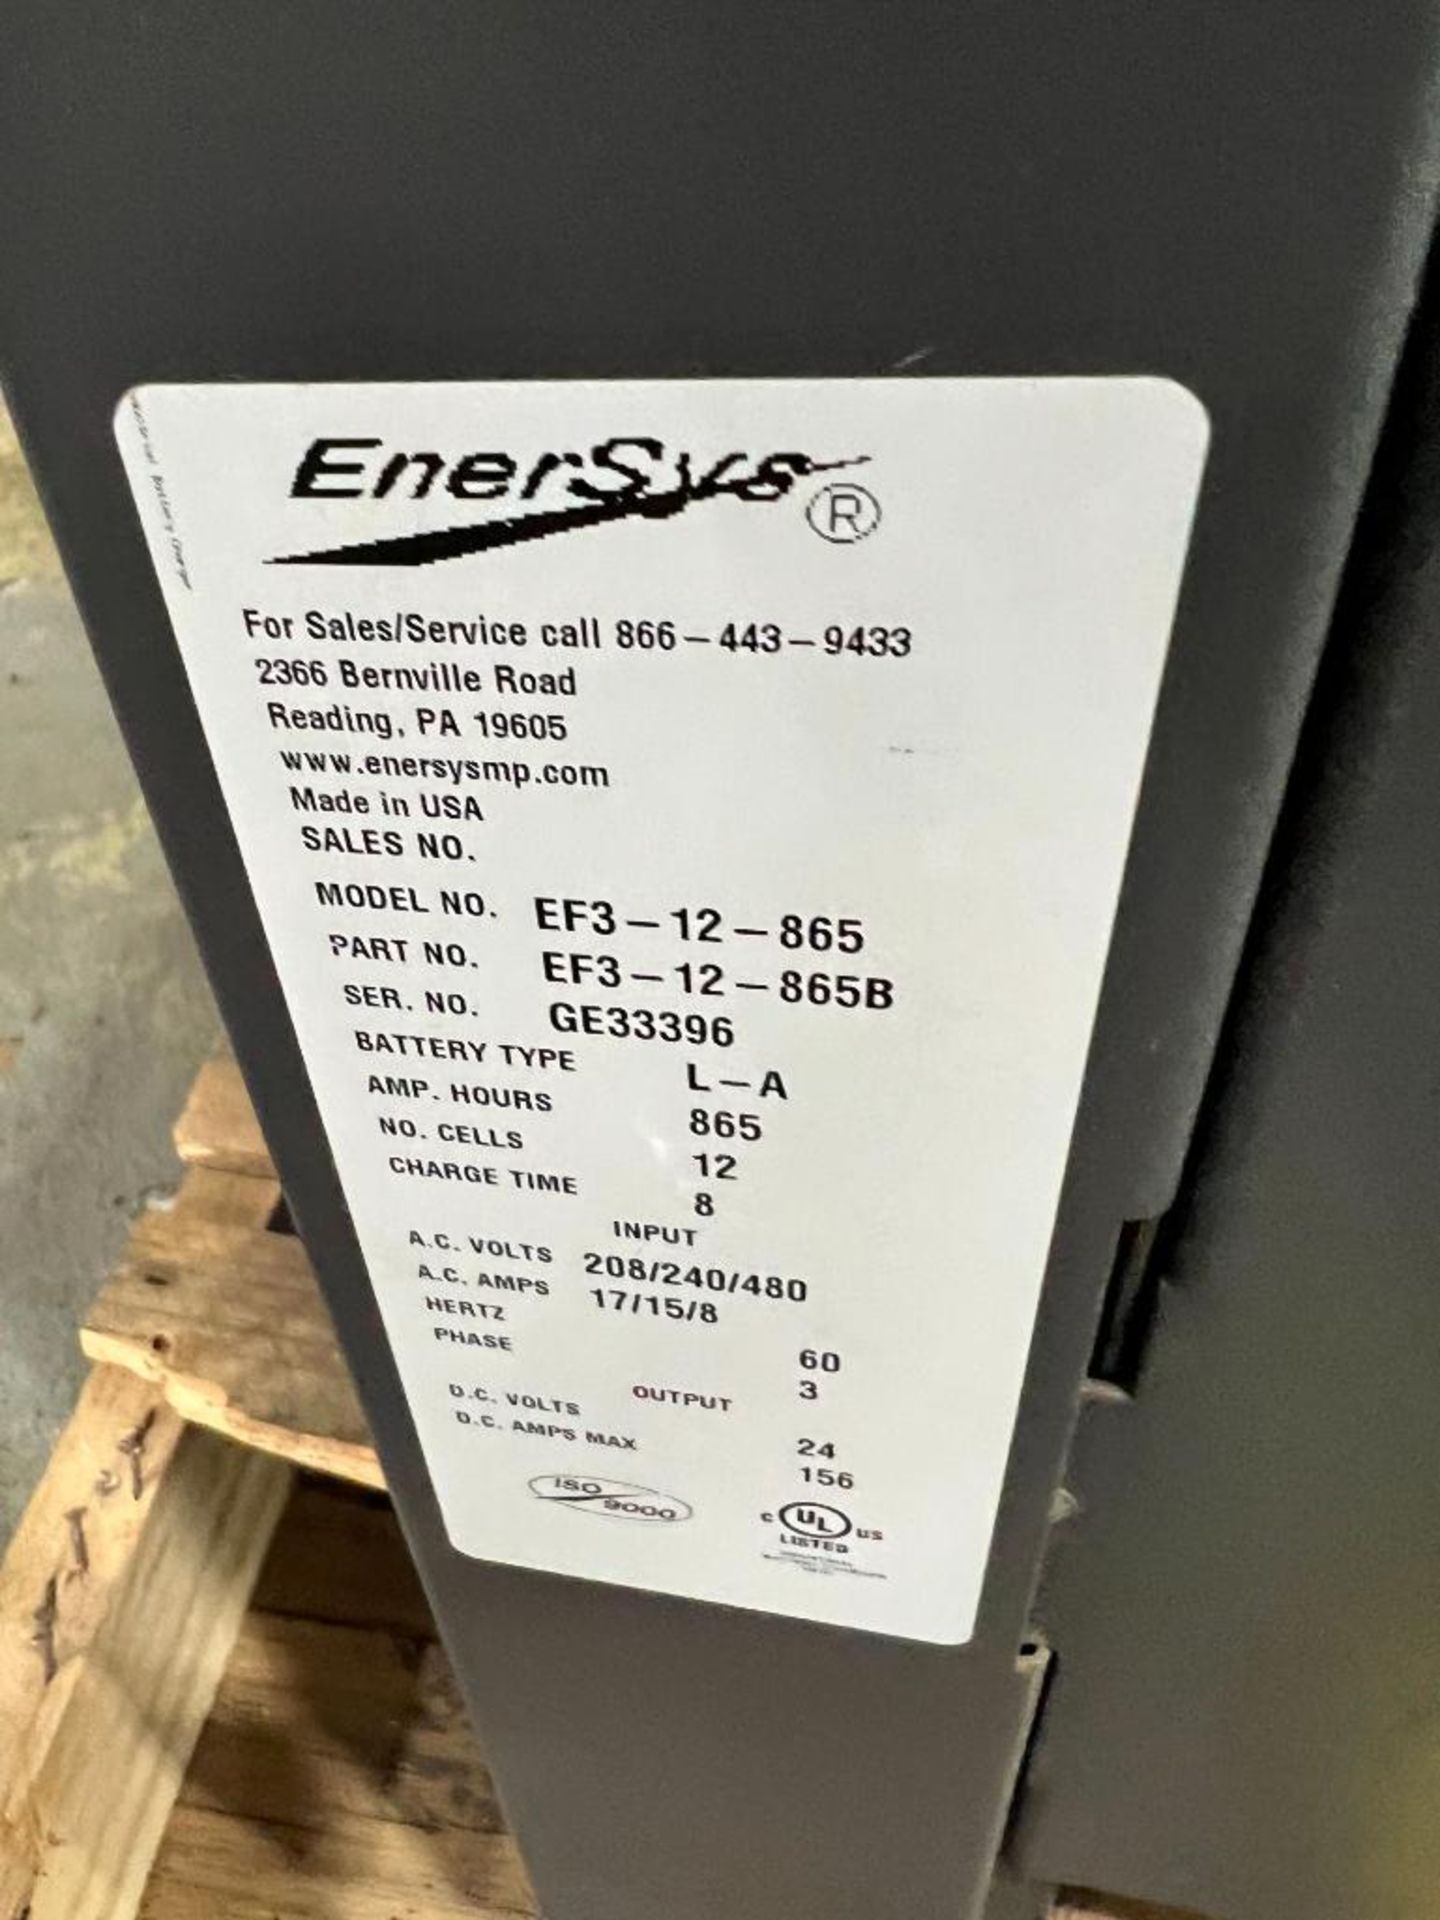 Enersys Enforcer Ferro 24 Battery Charger, Model EF3-12-865, S/N GE33396 ($25 Loading fee will be ad - Image 3 of 3